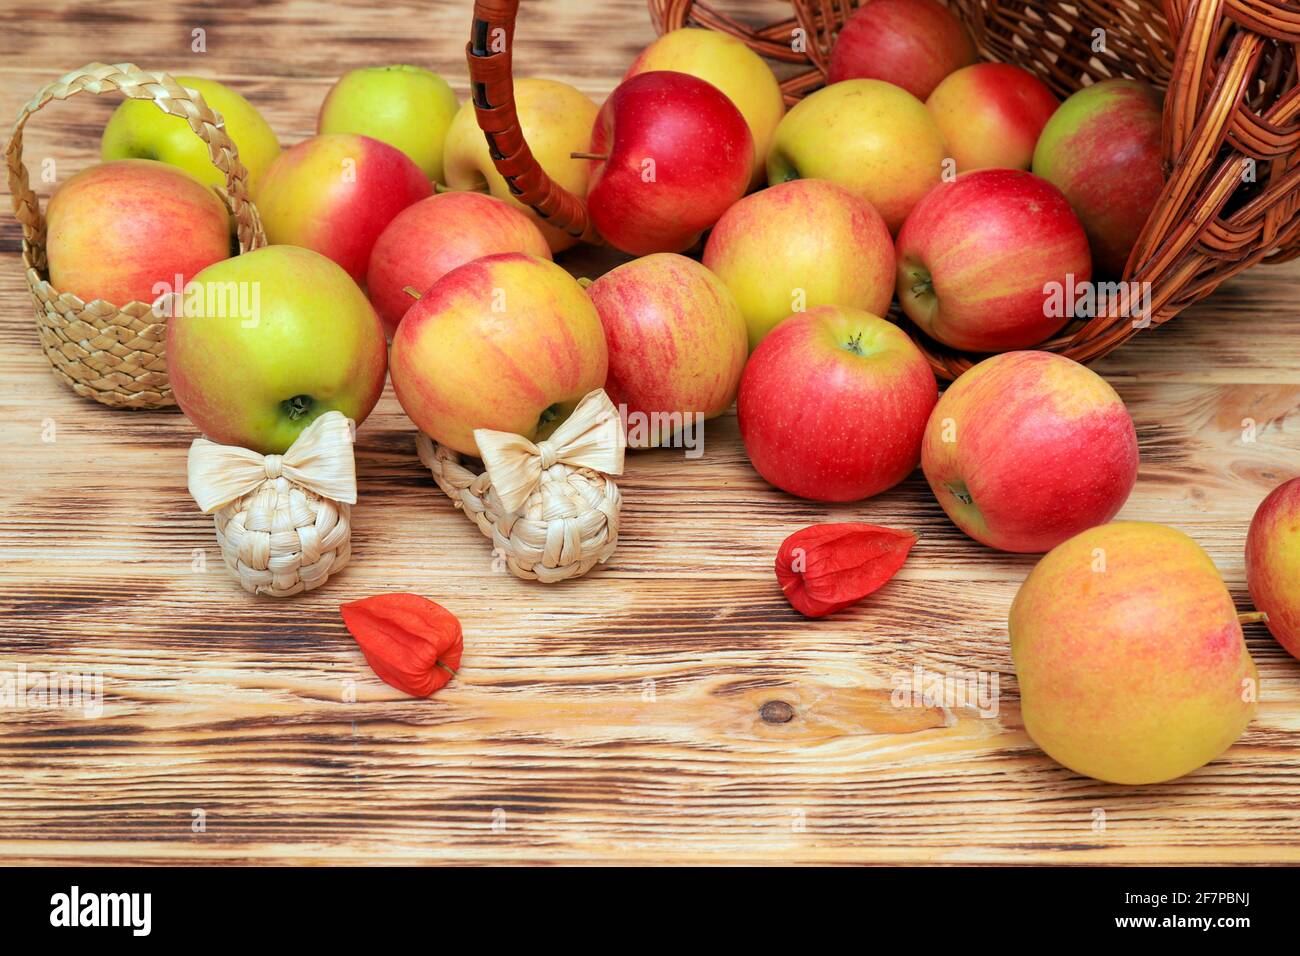 https://c8.alamy.com/comp/2F7PBNJ/fresh-ripe-red-and-yellow-apples-in-a-wicker-basket-on-a-wooden-background-healthy-food-for-vegetarians-2F7PBNJ.jpg